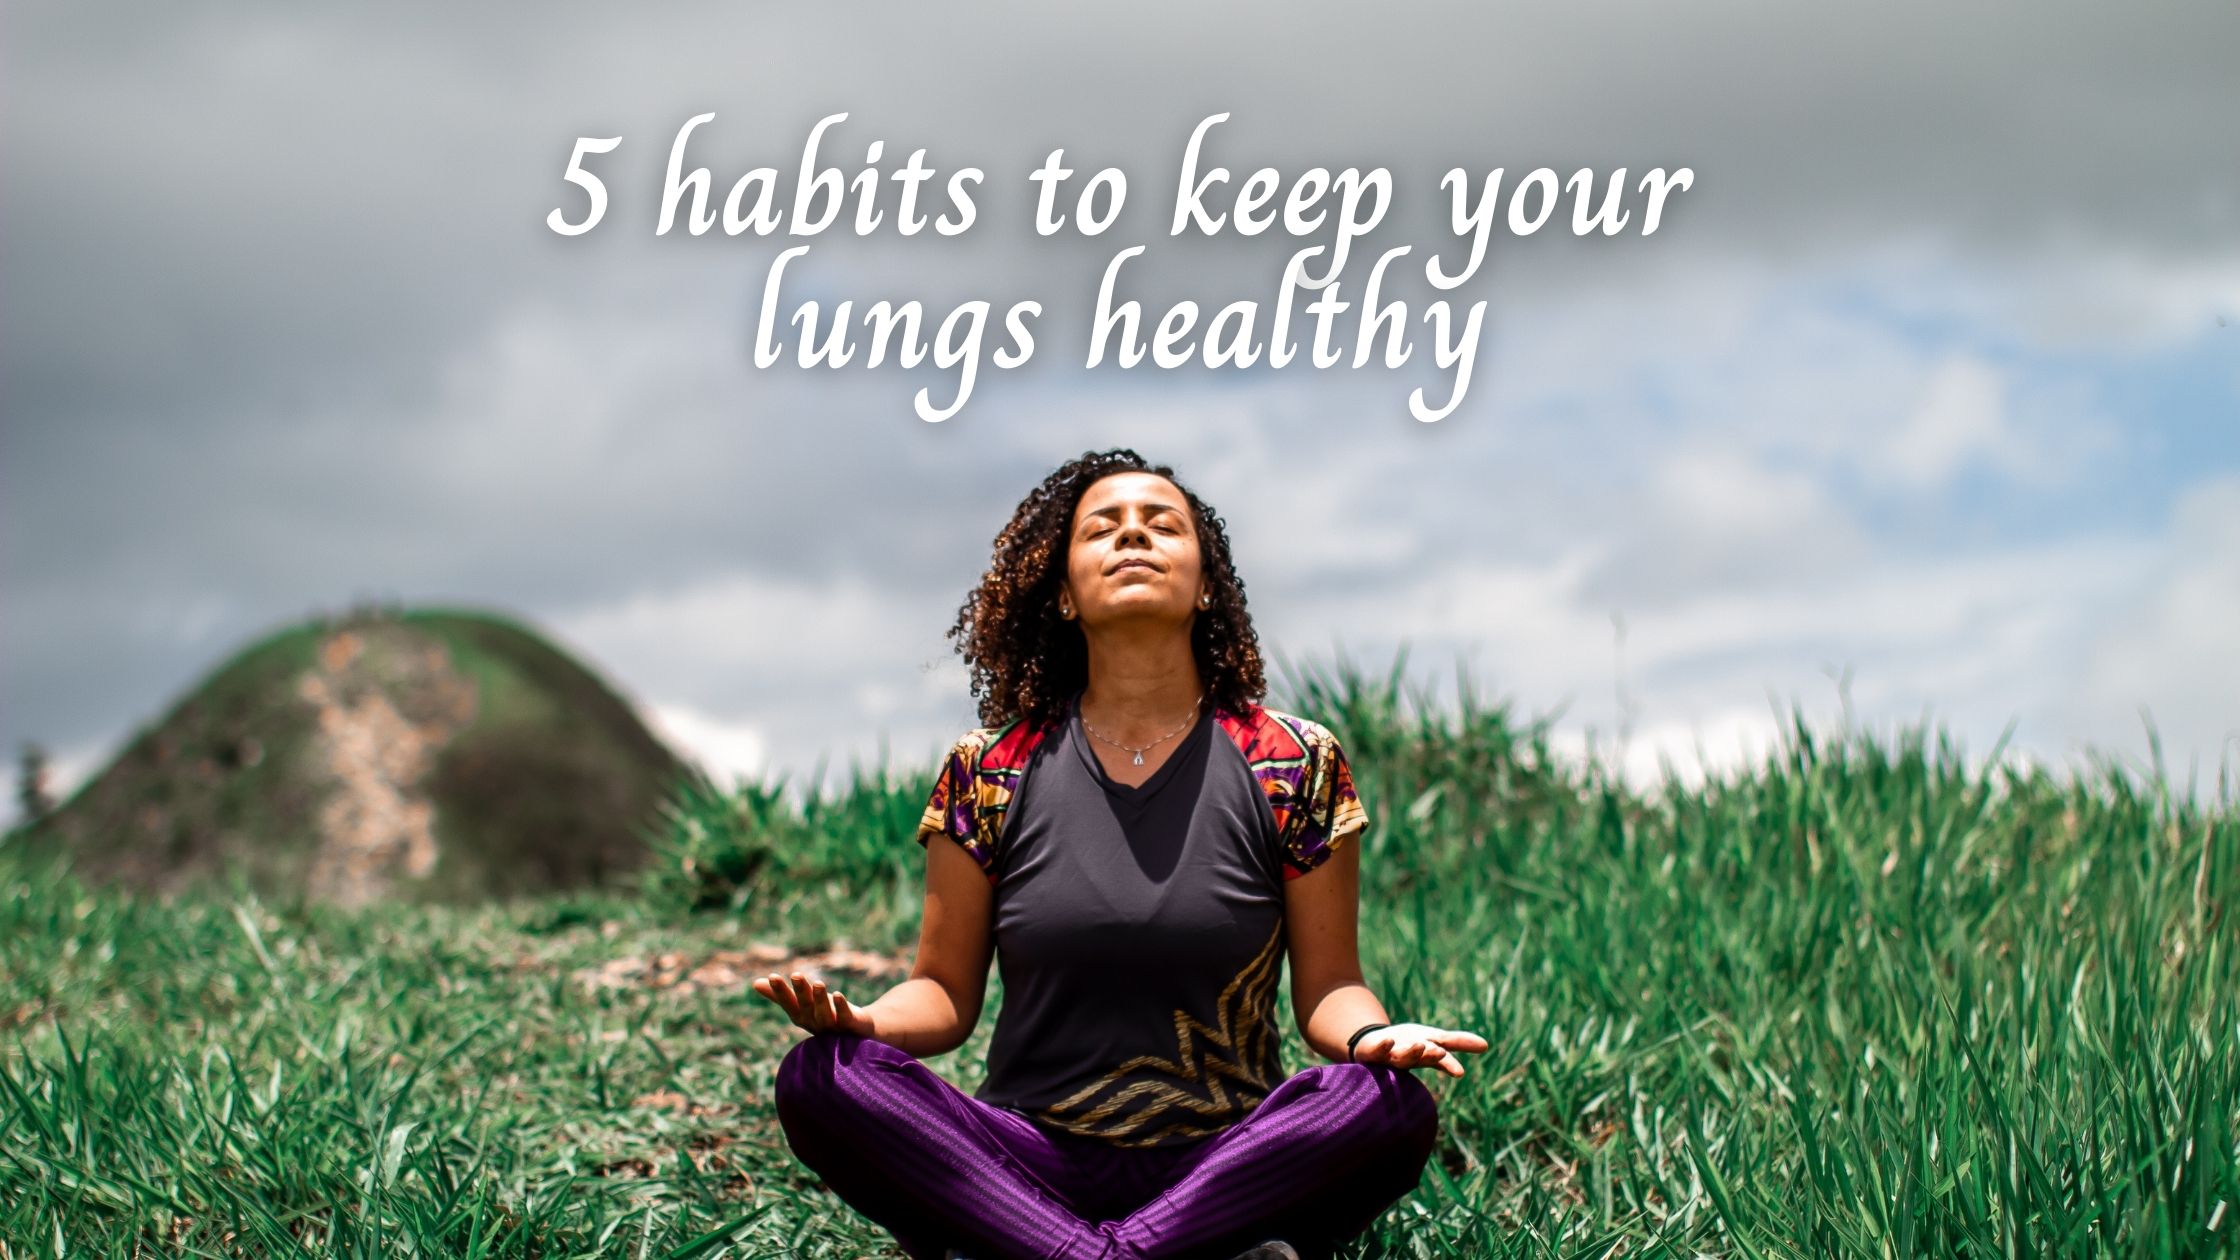 5 habits to keep your lungs healthy